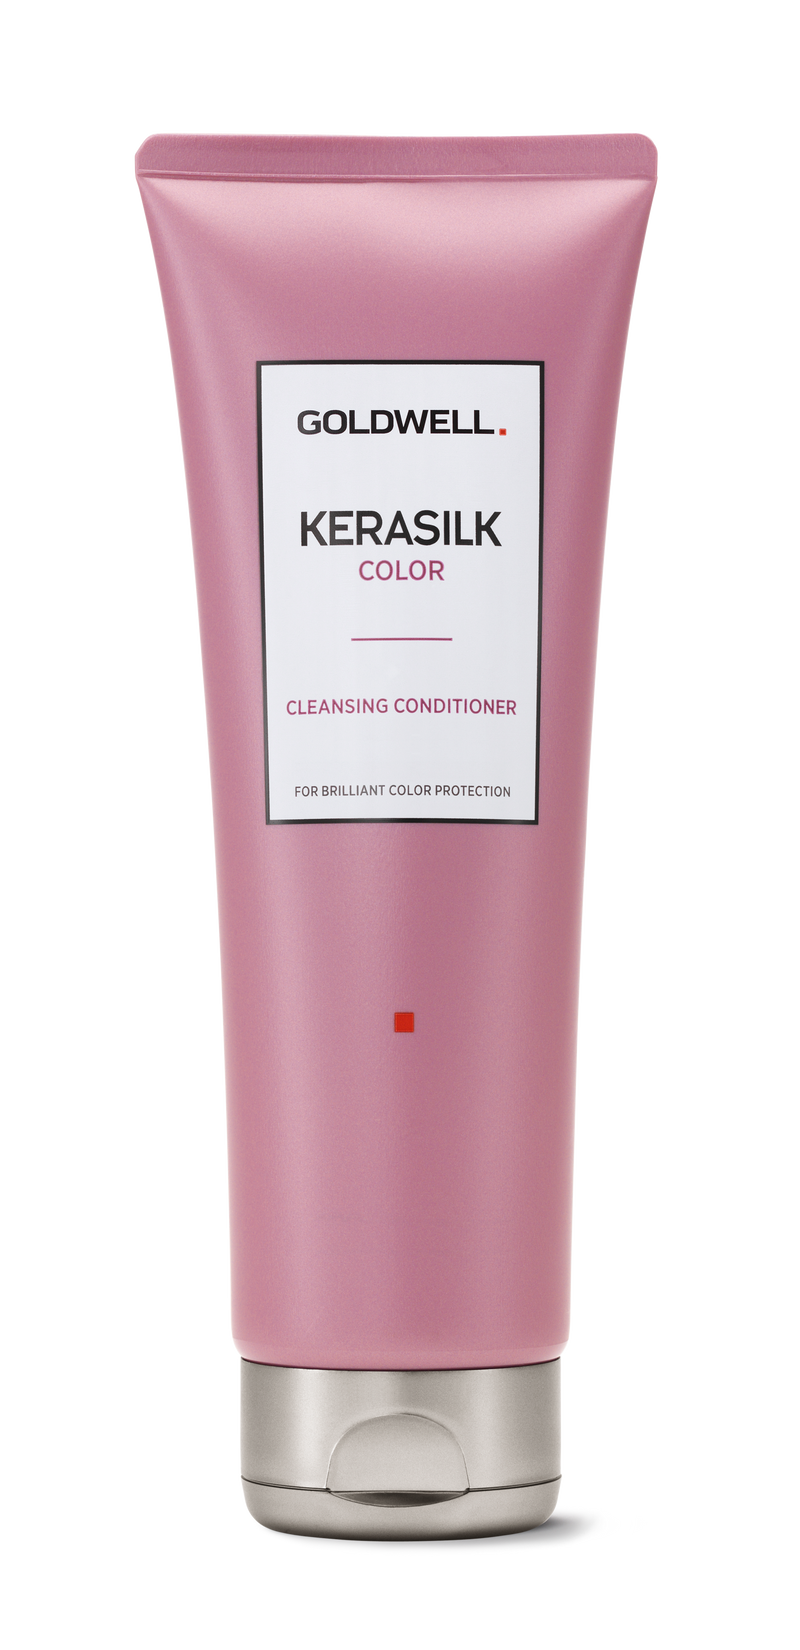 Goldwell-Kerasilk Color Cleansing Conditioner 250ml